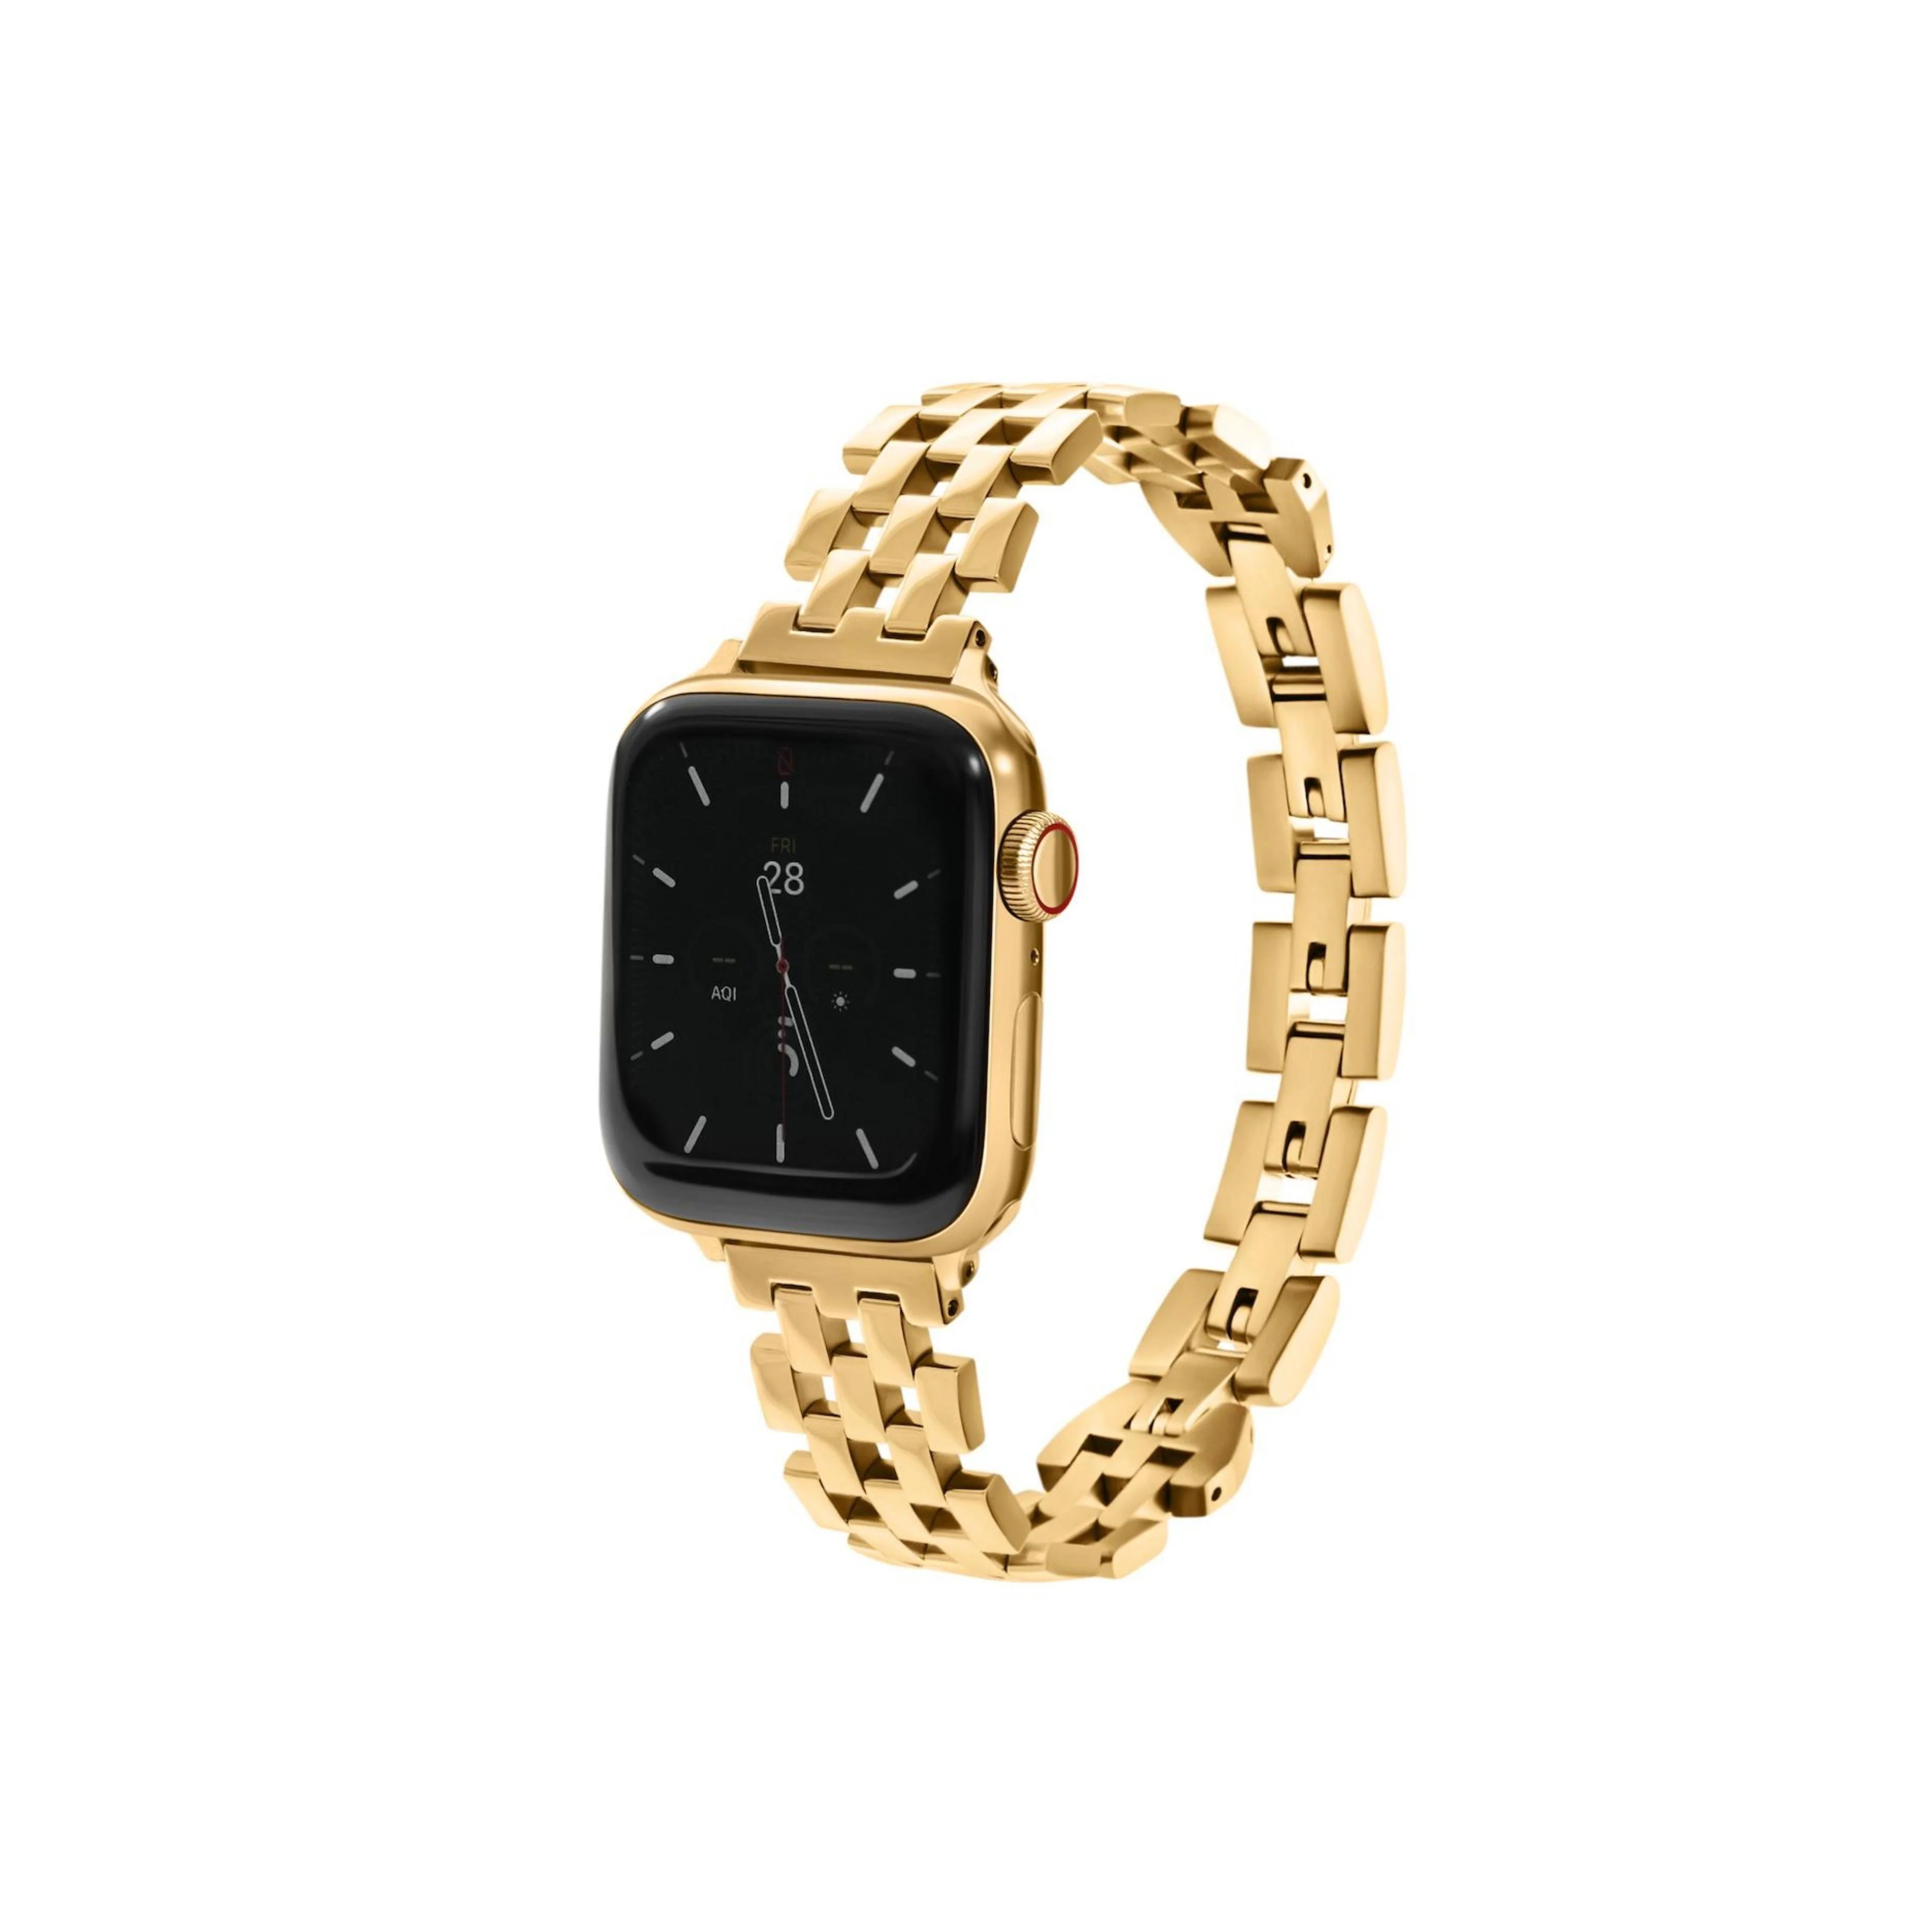 Basketweave Stainless Steel Band for the Apple Watch | Goldenerre